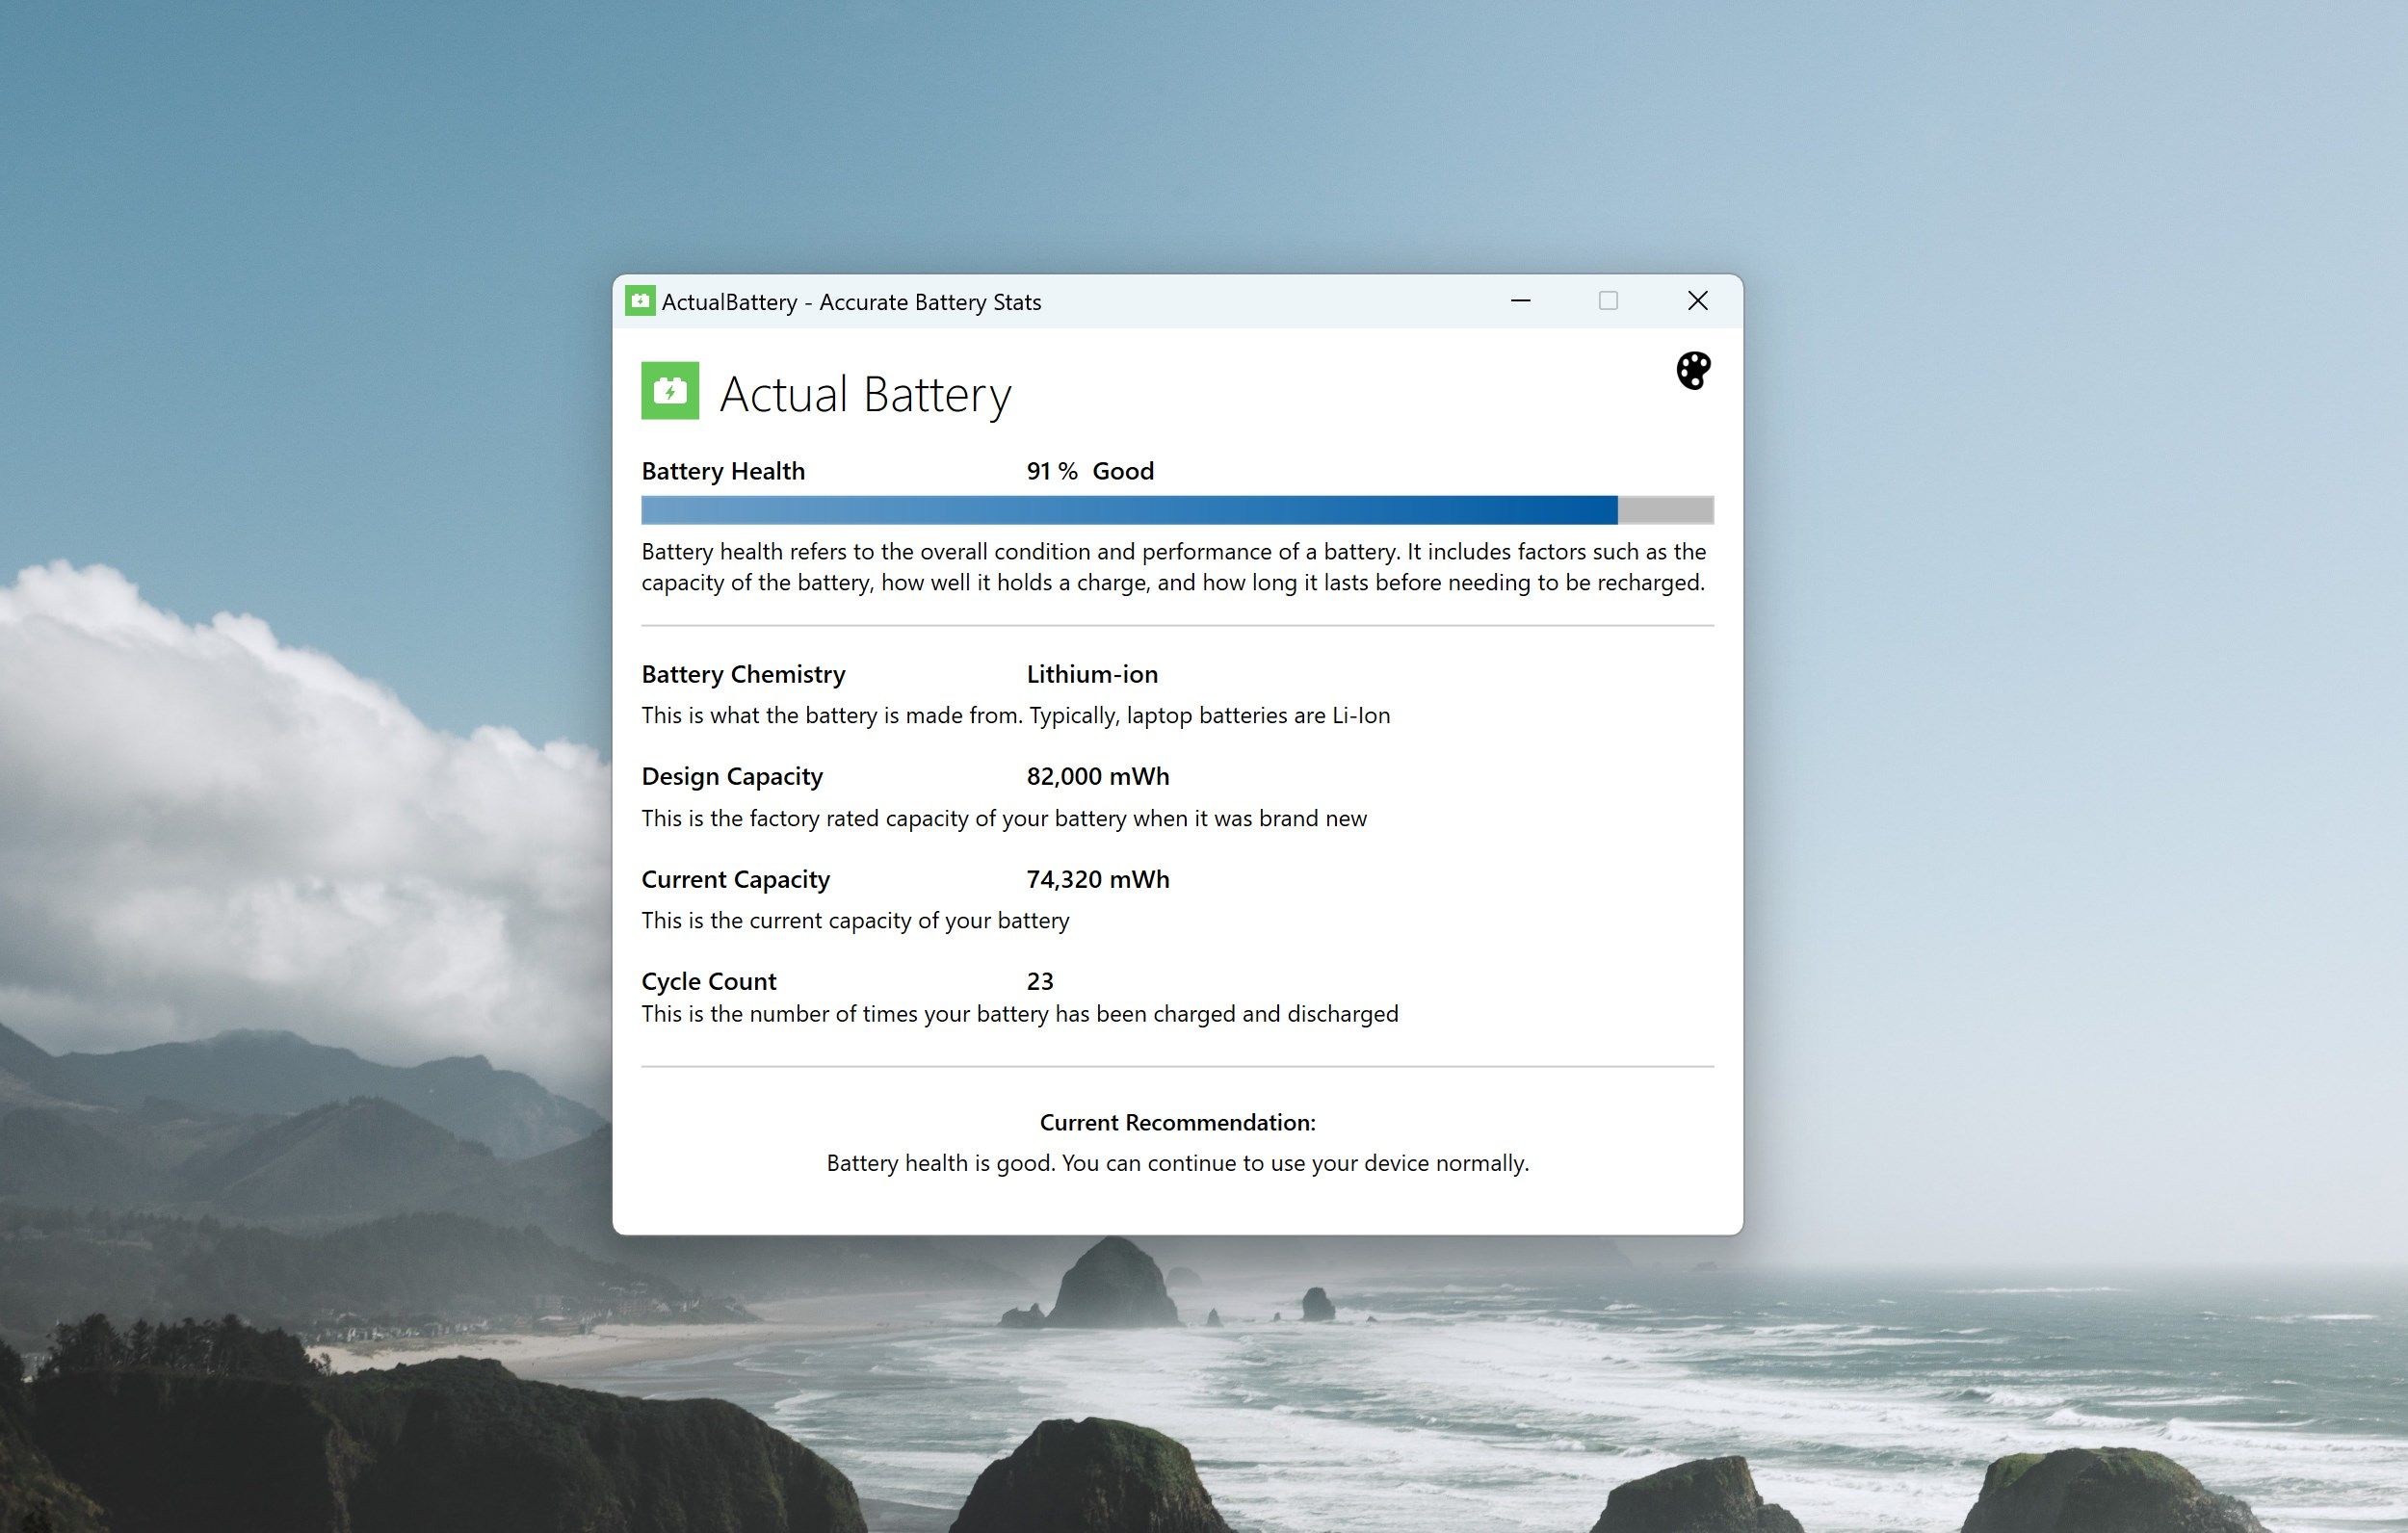 ActualBattery - Accurate Battery Stats